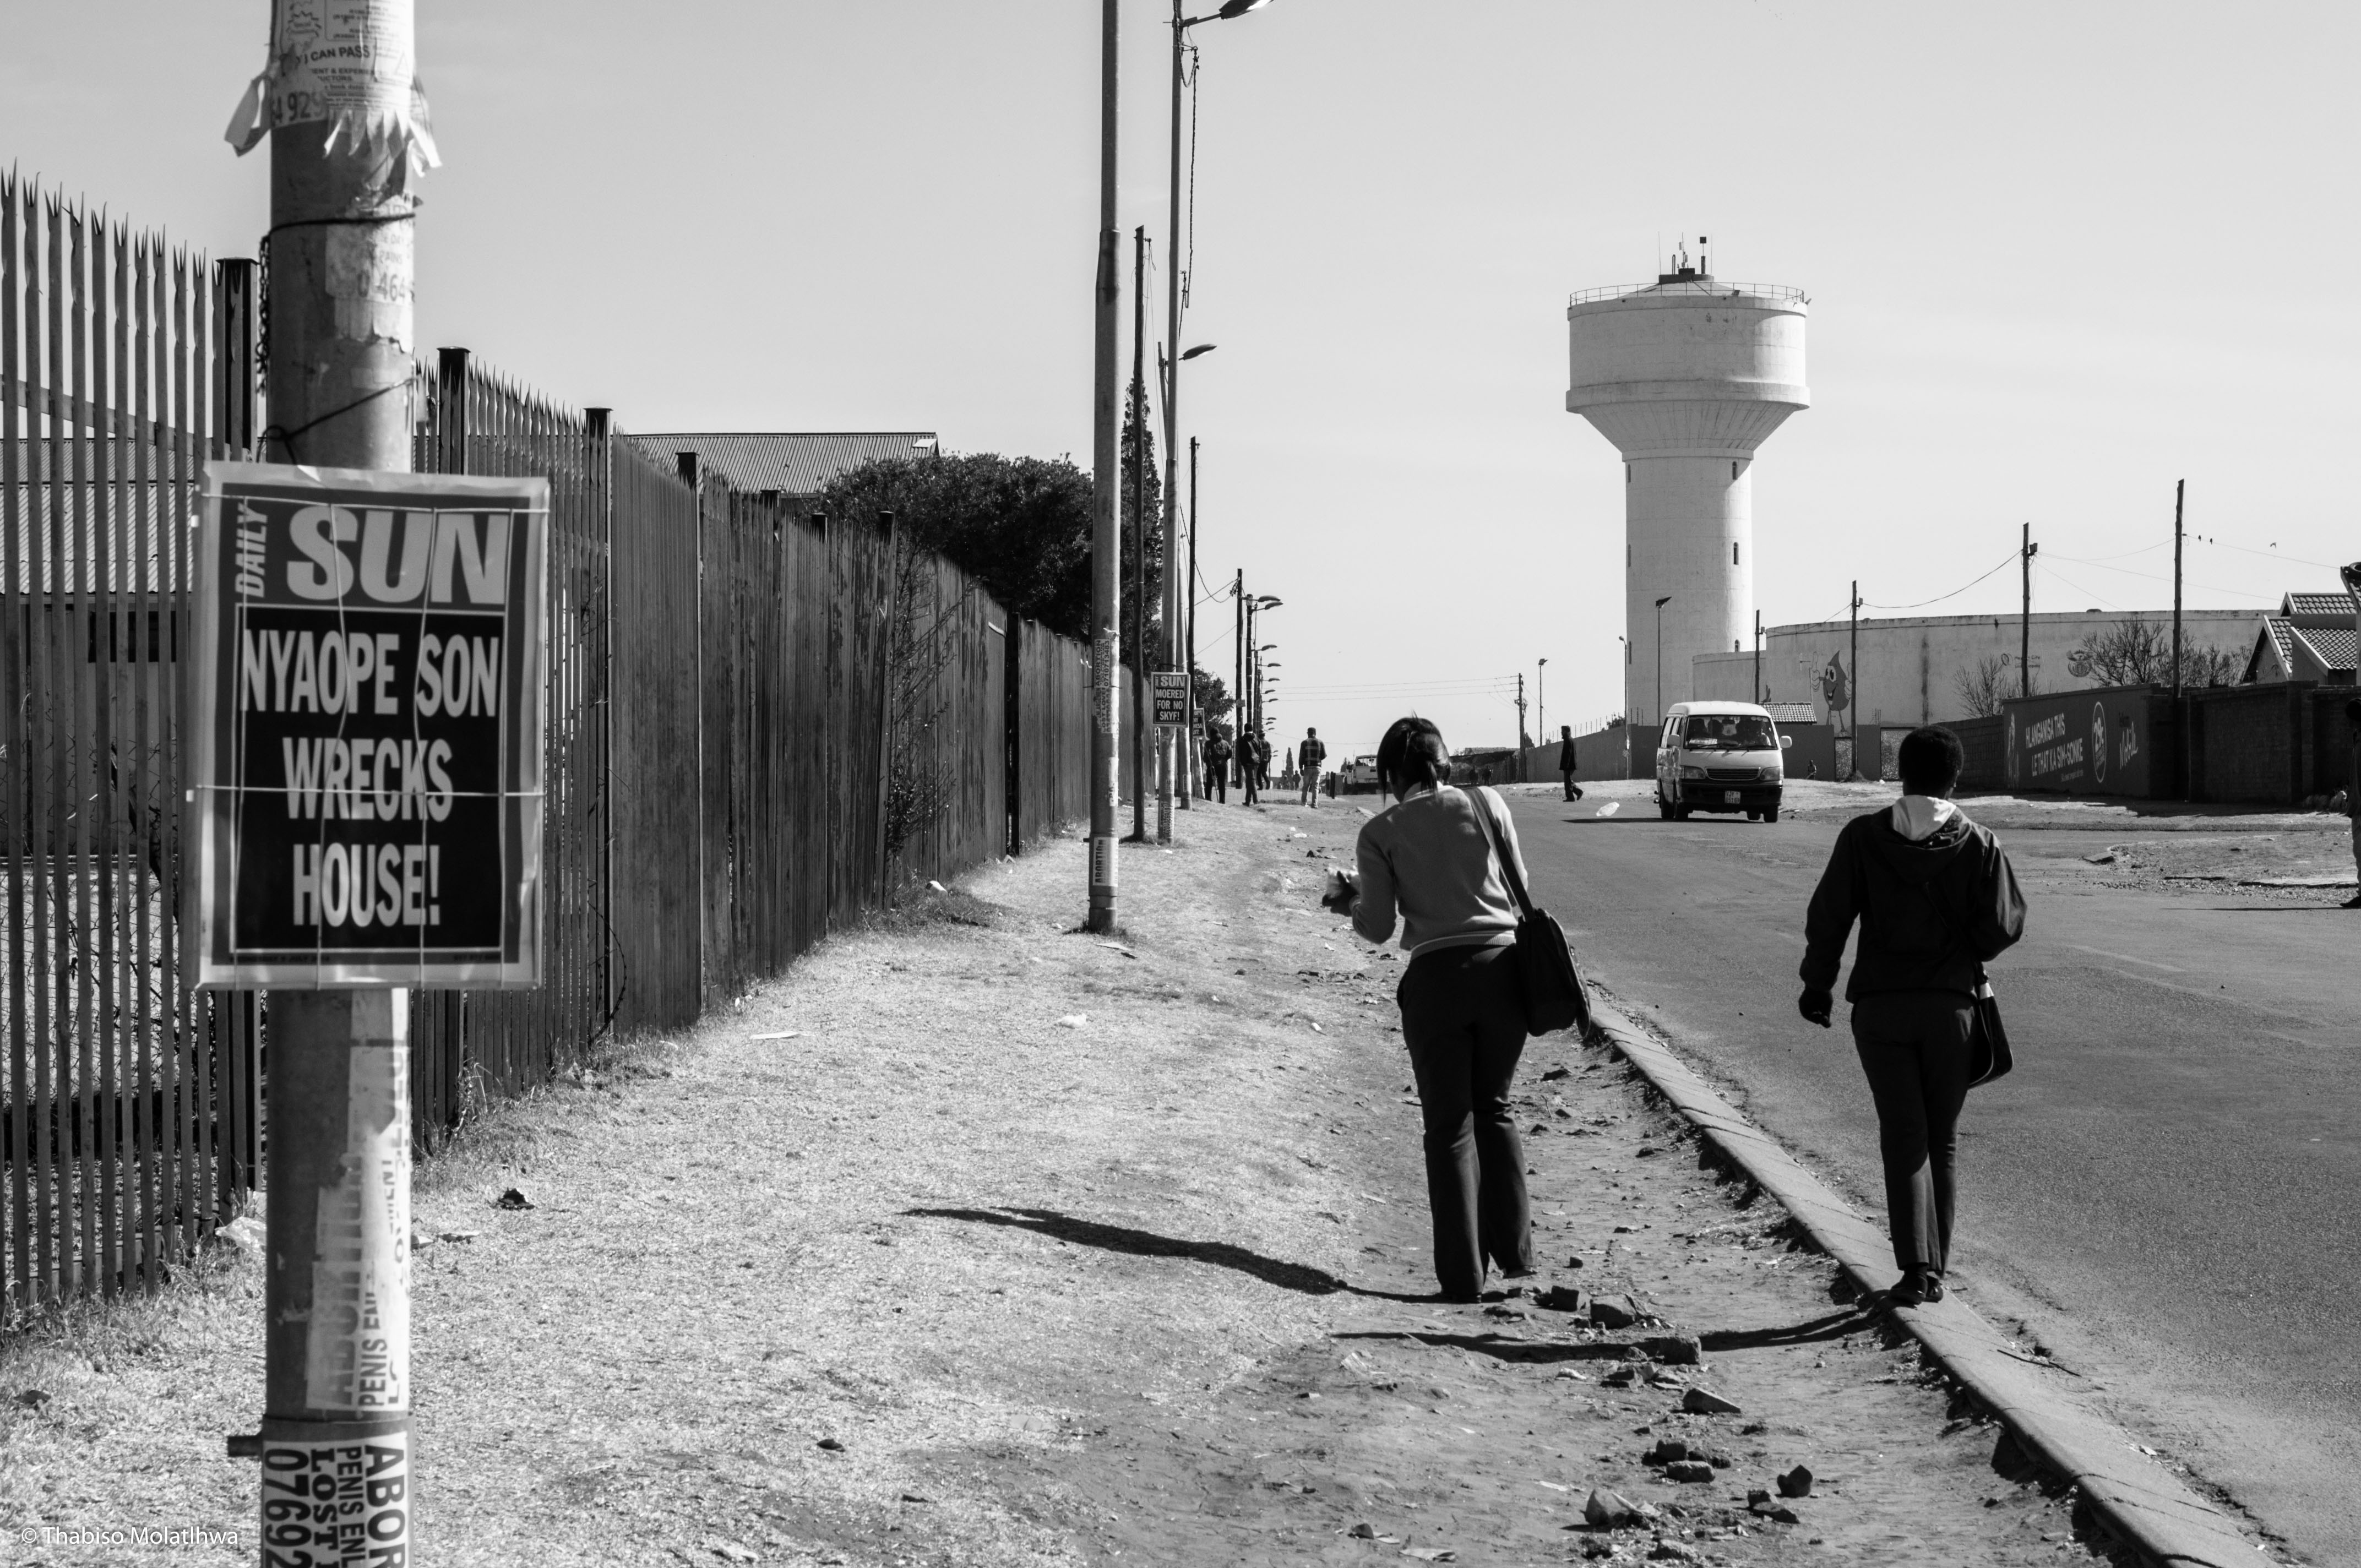 This image was taken by young photographers in the Livity Africa media training programme in South Africa.